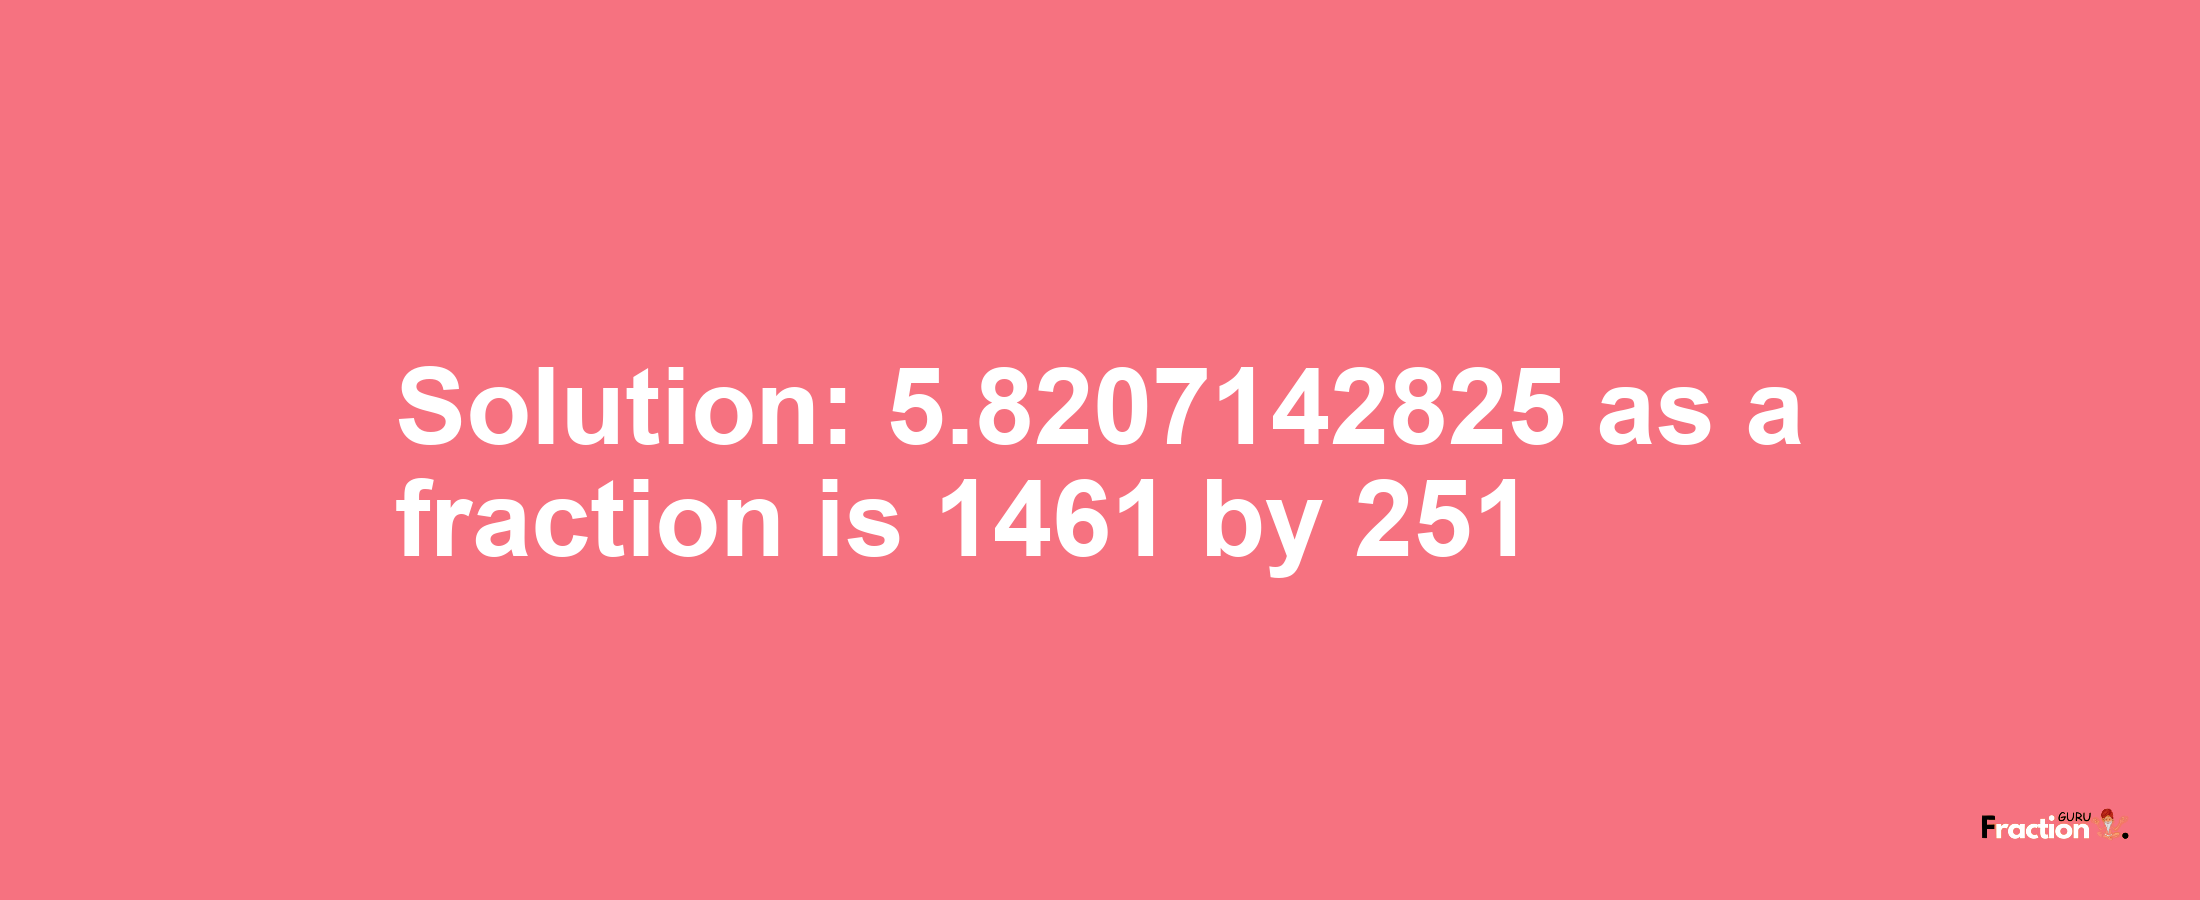 Solution:5.8207142825 as a fraction is 1461/251